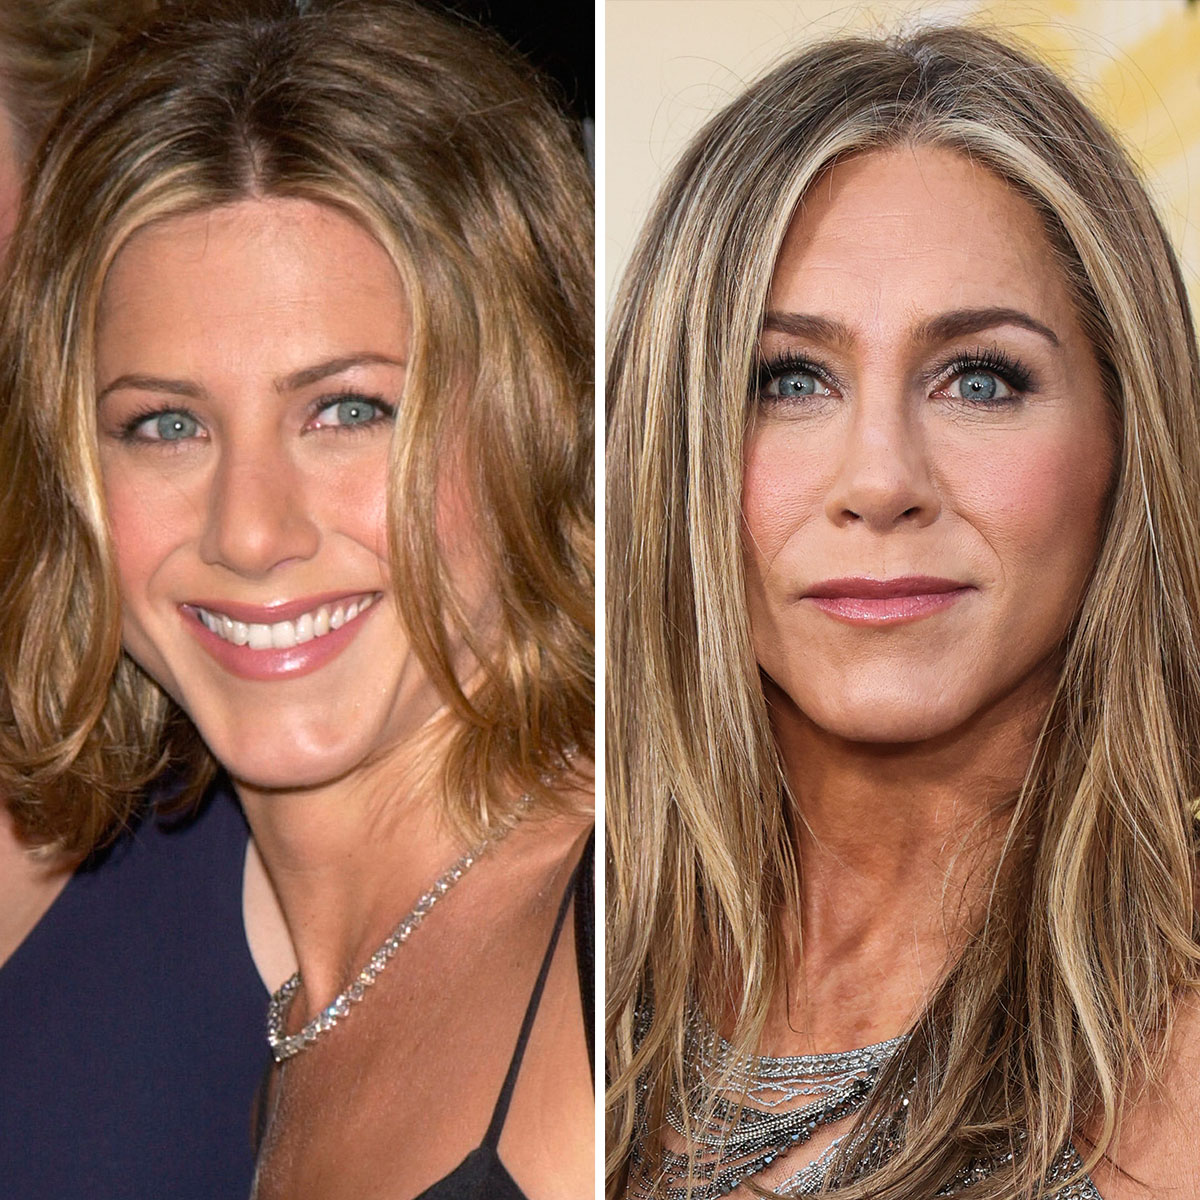 Jennifer Aniston Called 'Unrecognizable and Weird' For Plastic